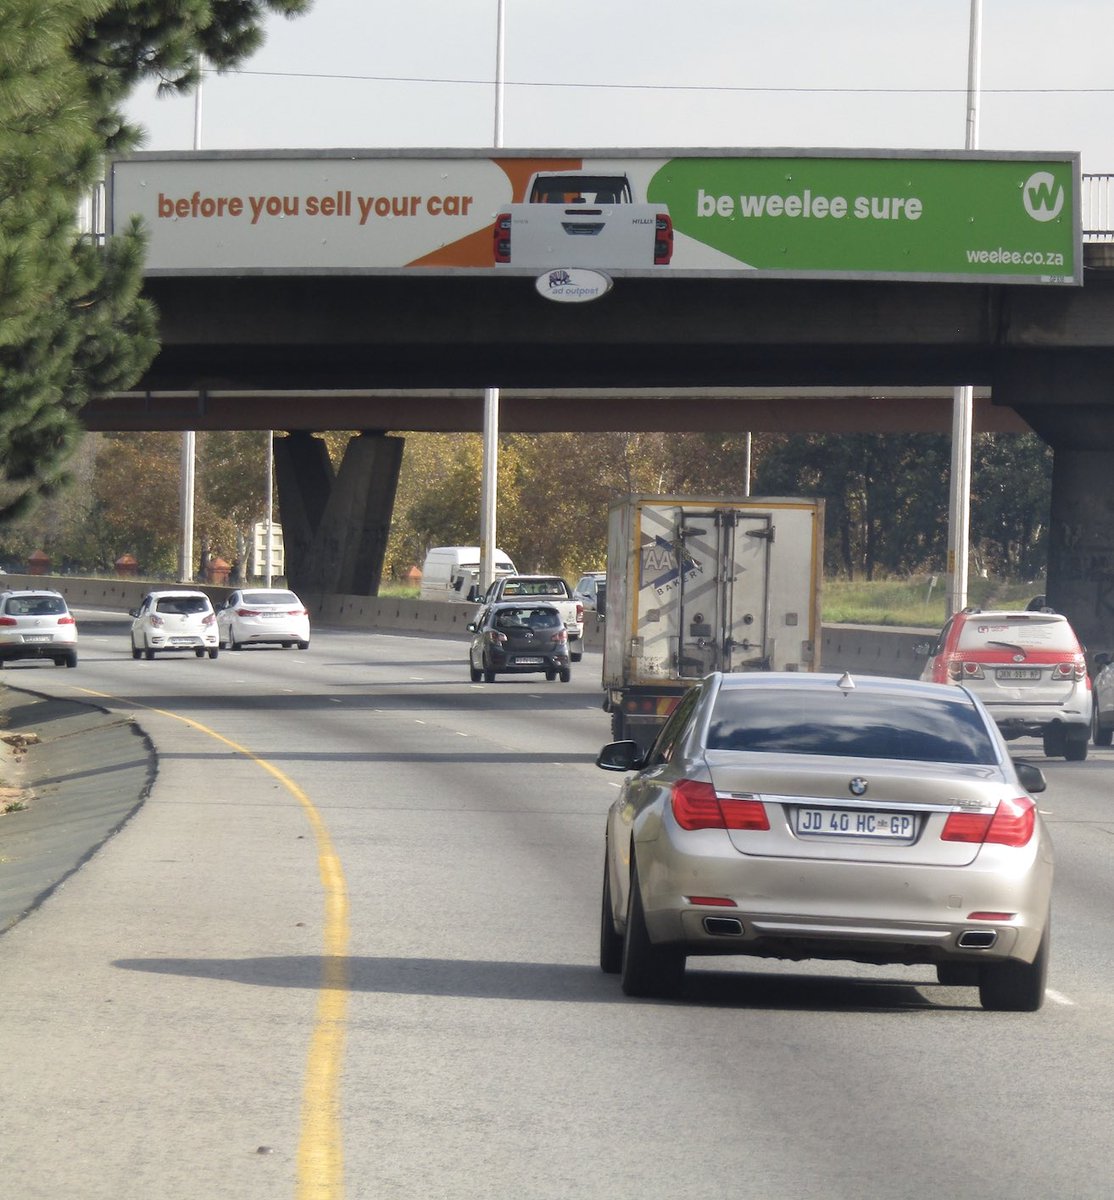 We’ve been trying to figure out what’s the best way to sell our car. Wanting to keep our options open and get the best deal.  We saw this billboard by Weelee which made us😂. What do you think of Weelee?

News24 had this to say about them
bit.ly/44KnWNn #BeWeeleeSure #Ad